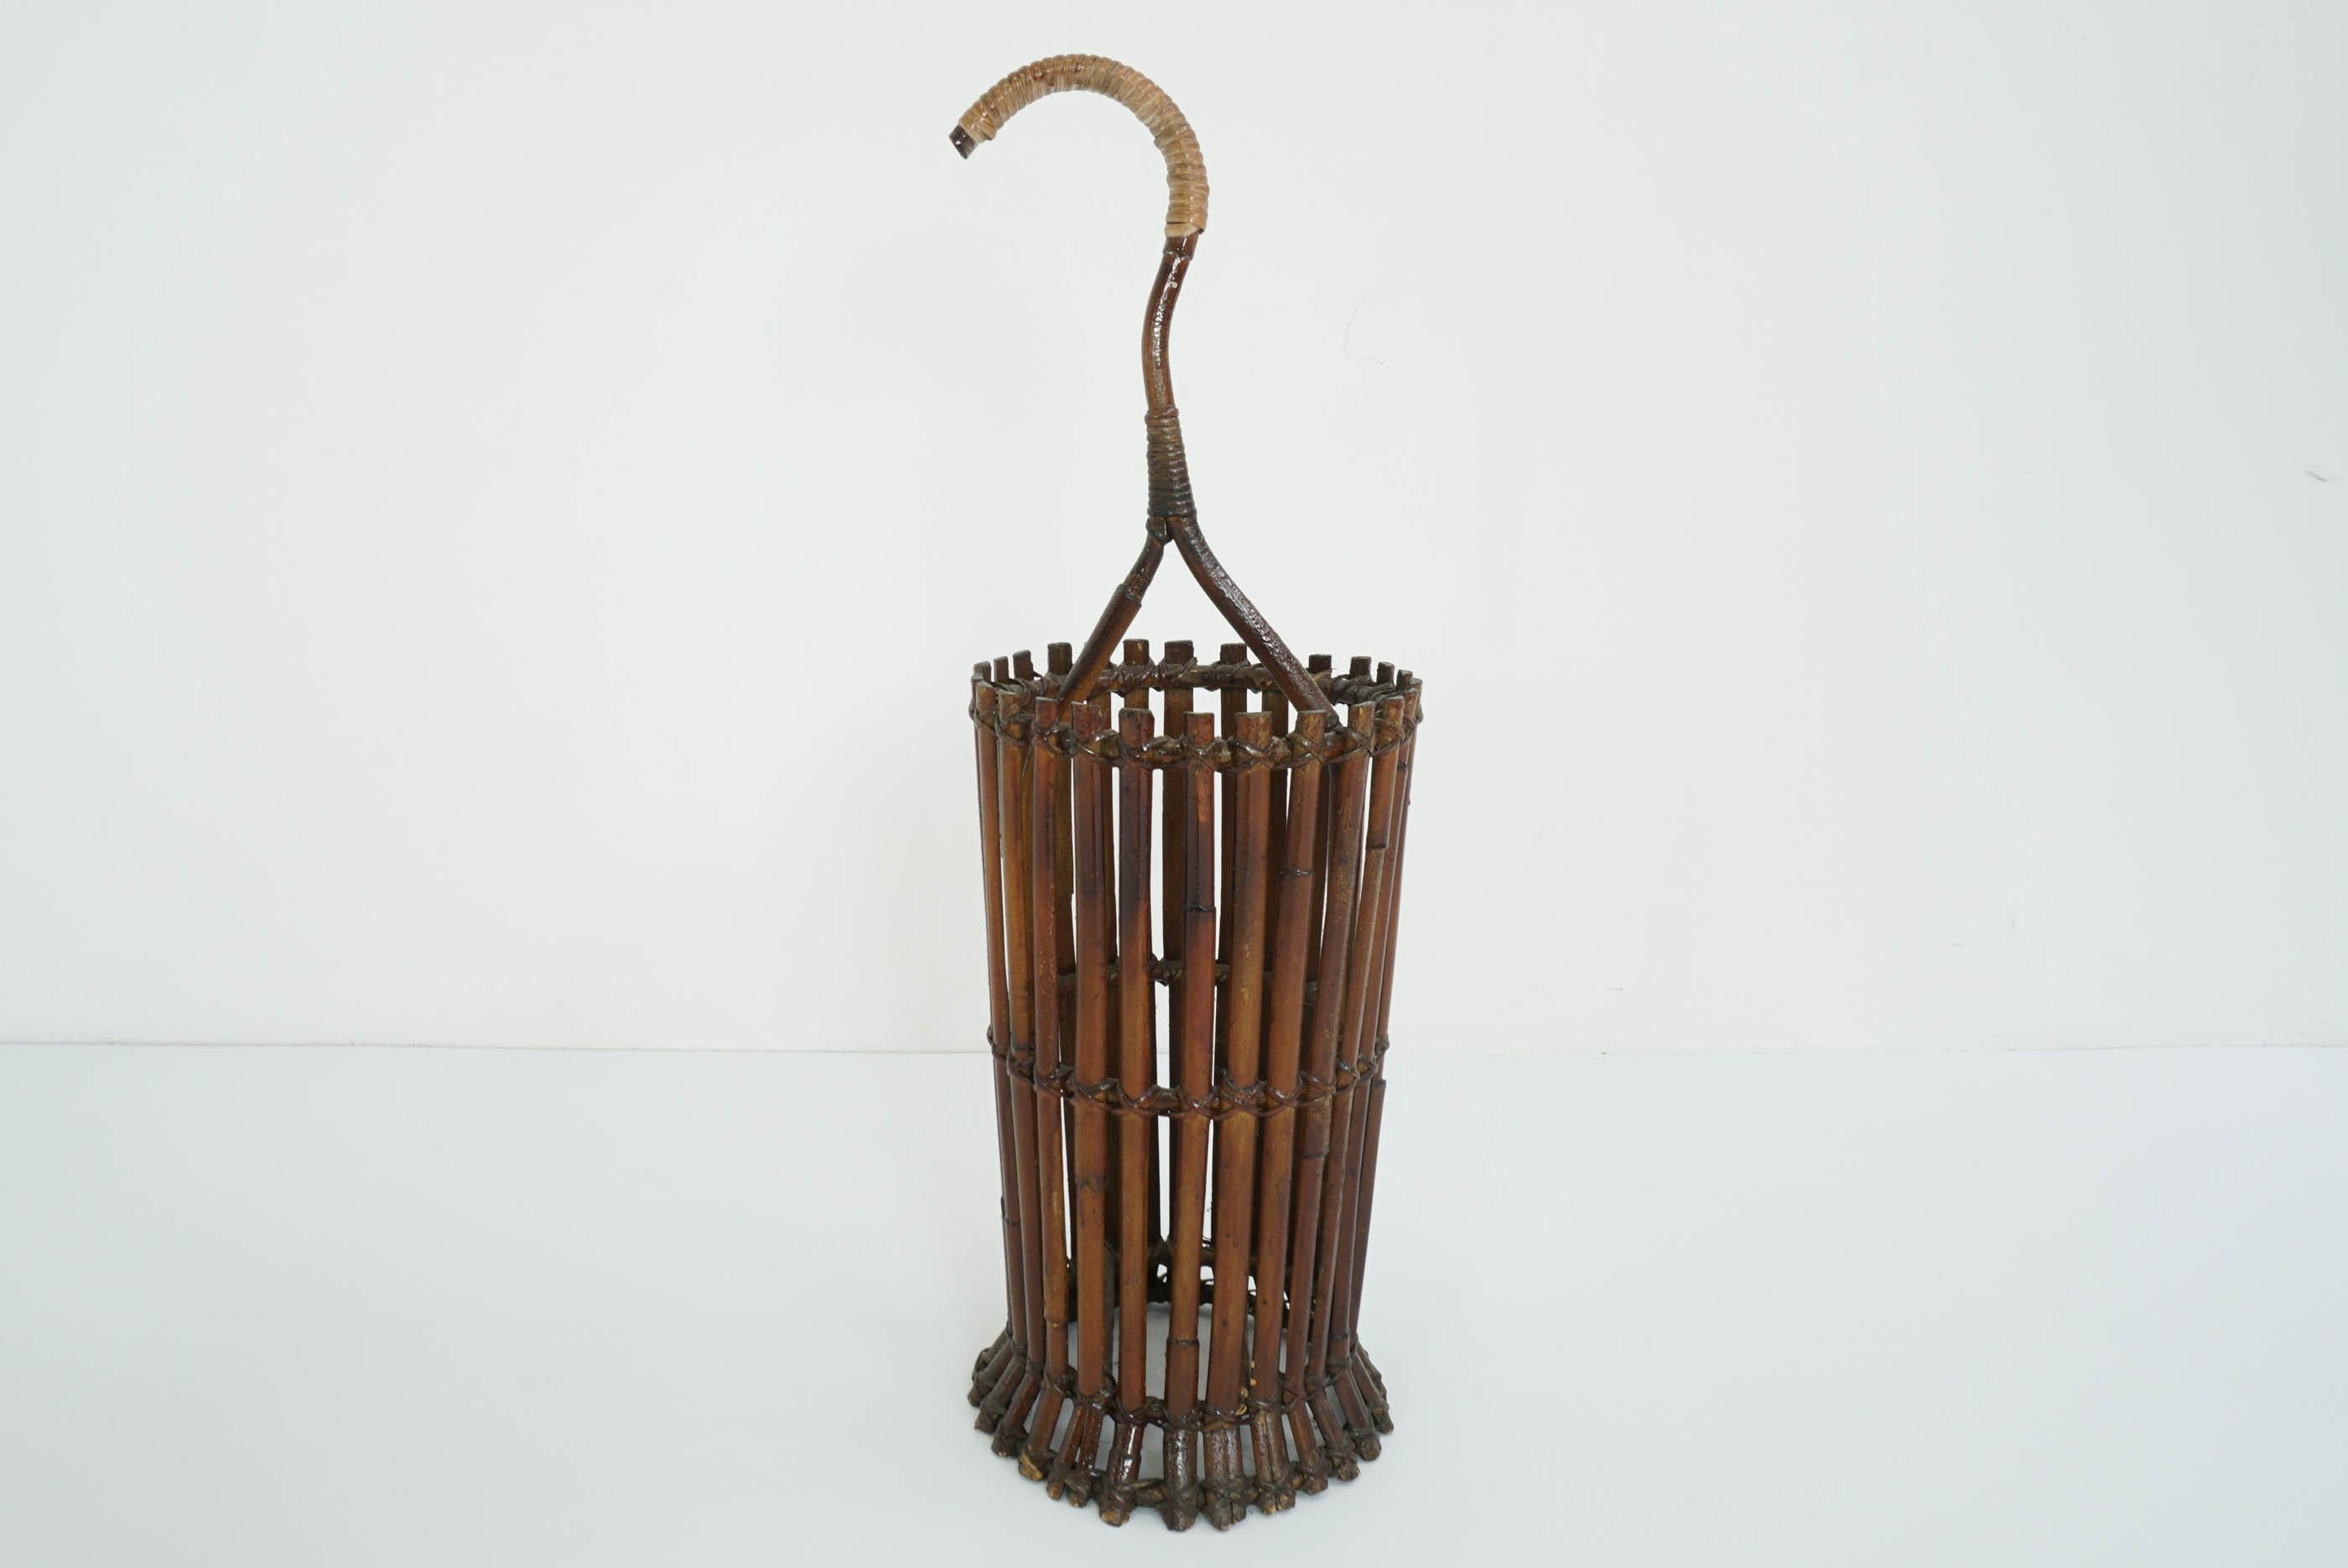 Beautiful sticks holder or umbrella stand in bamboo
Italy, 1950.